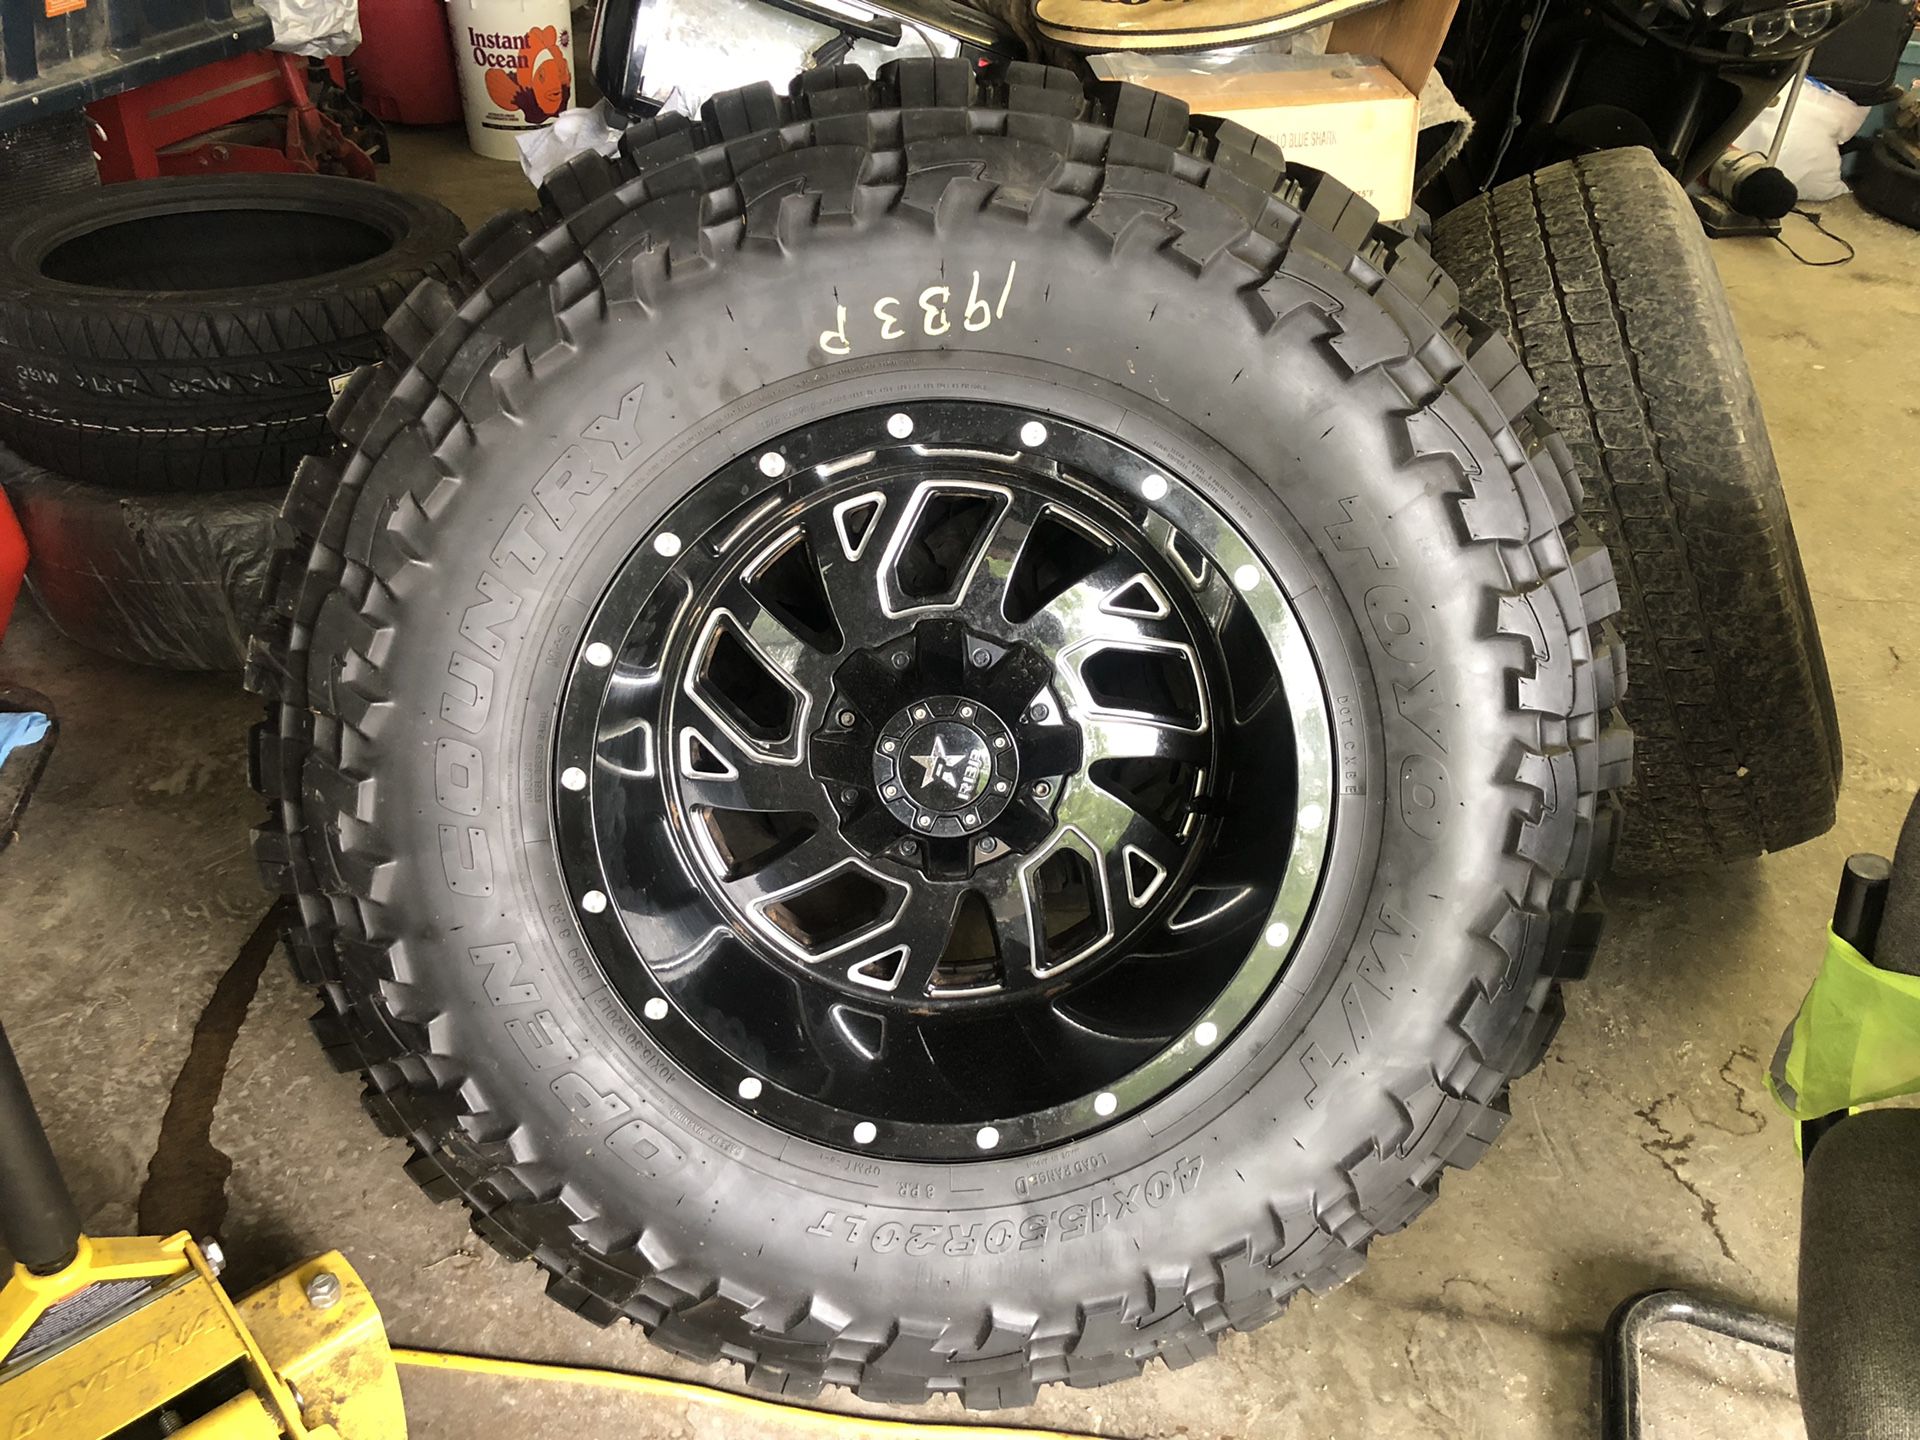 RBP 20 inch rims on toyo open country m/t 40x15.50.20